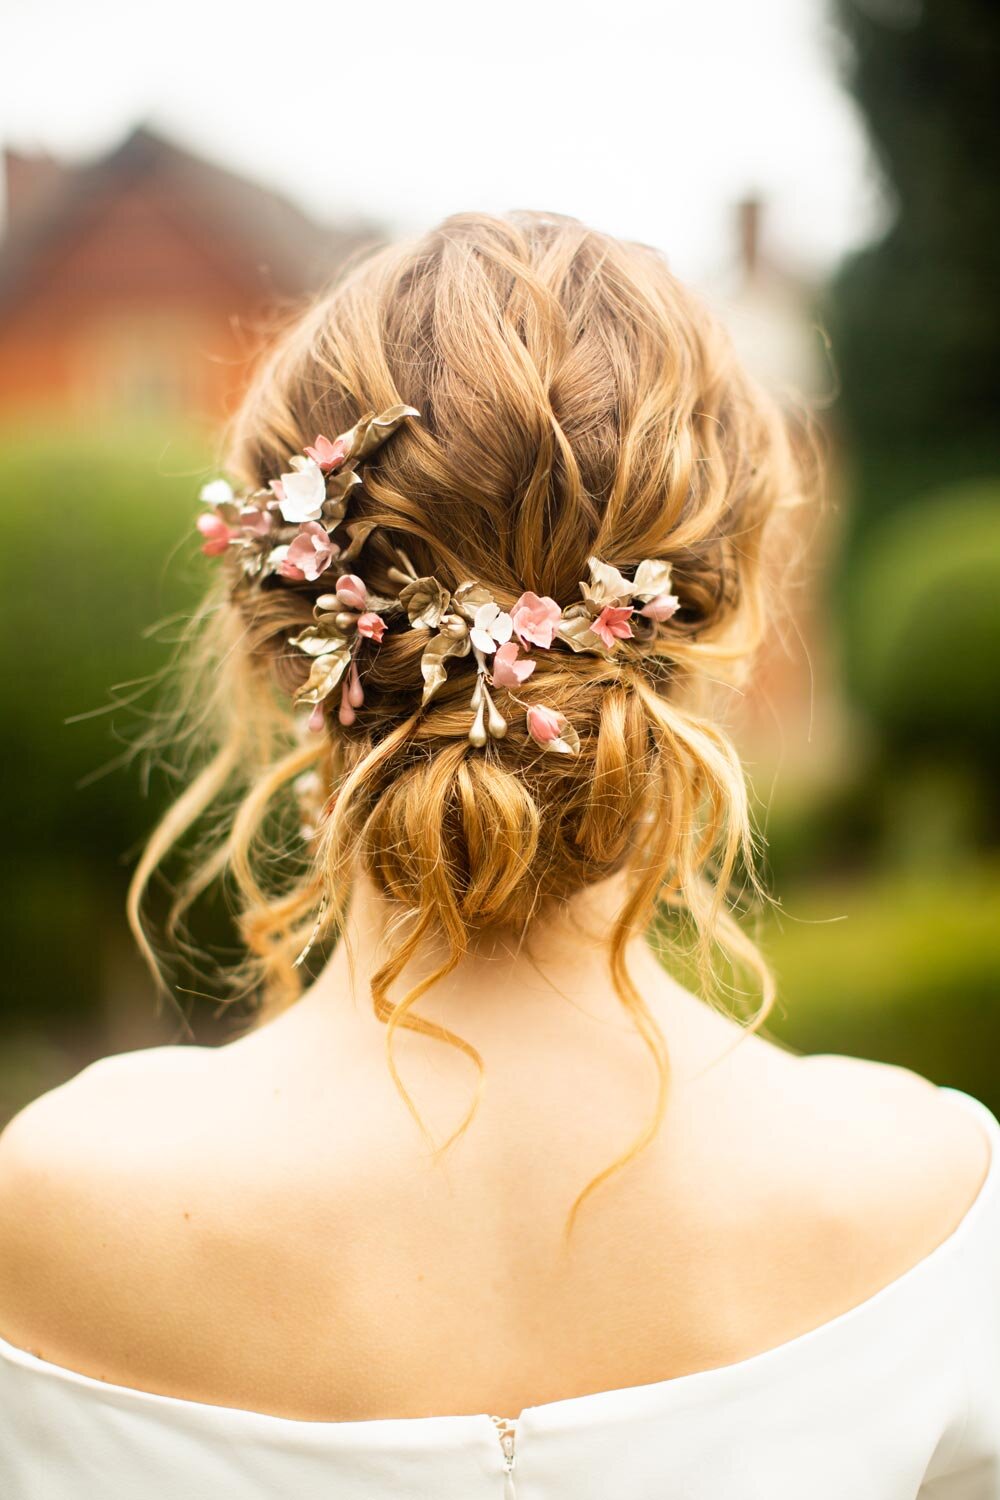 floral-wedding-hair-accessories-by-ps-with-love-wotton-house-dorking.jpg